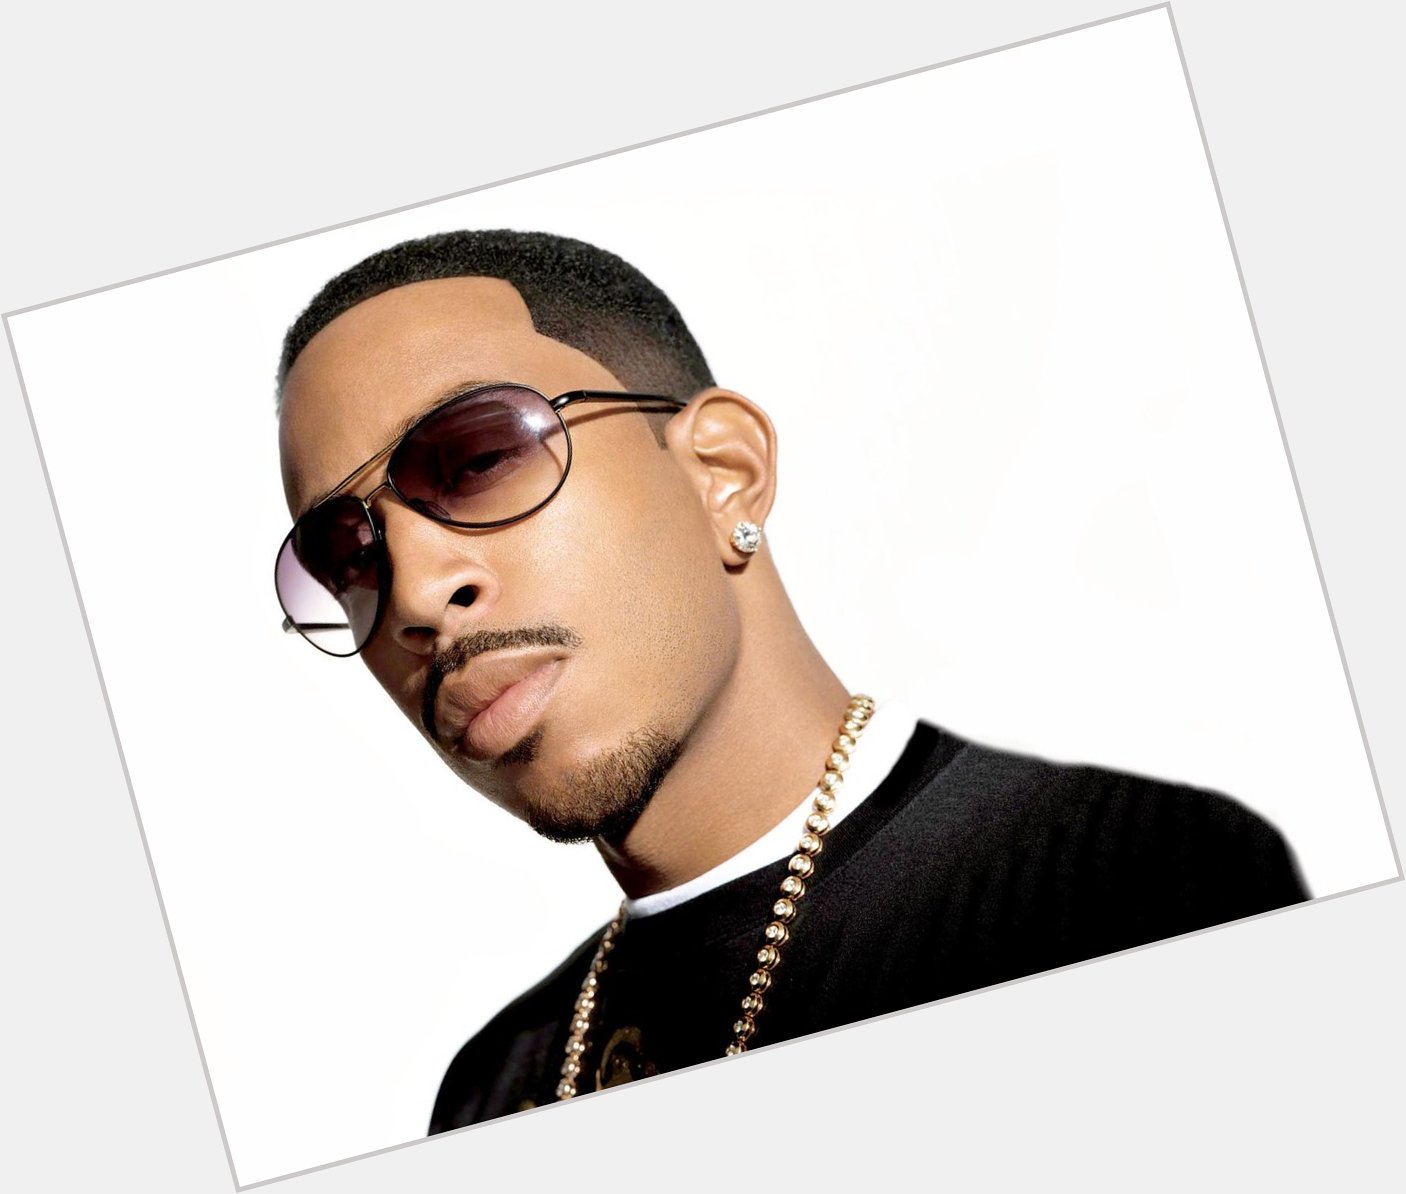 Happy birthday to actor / rapper Ludacris who turns 38 years old today 